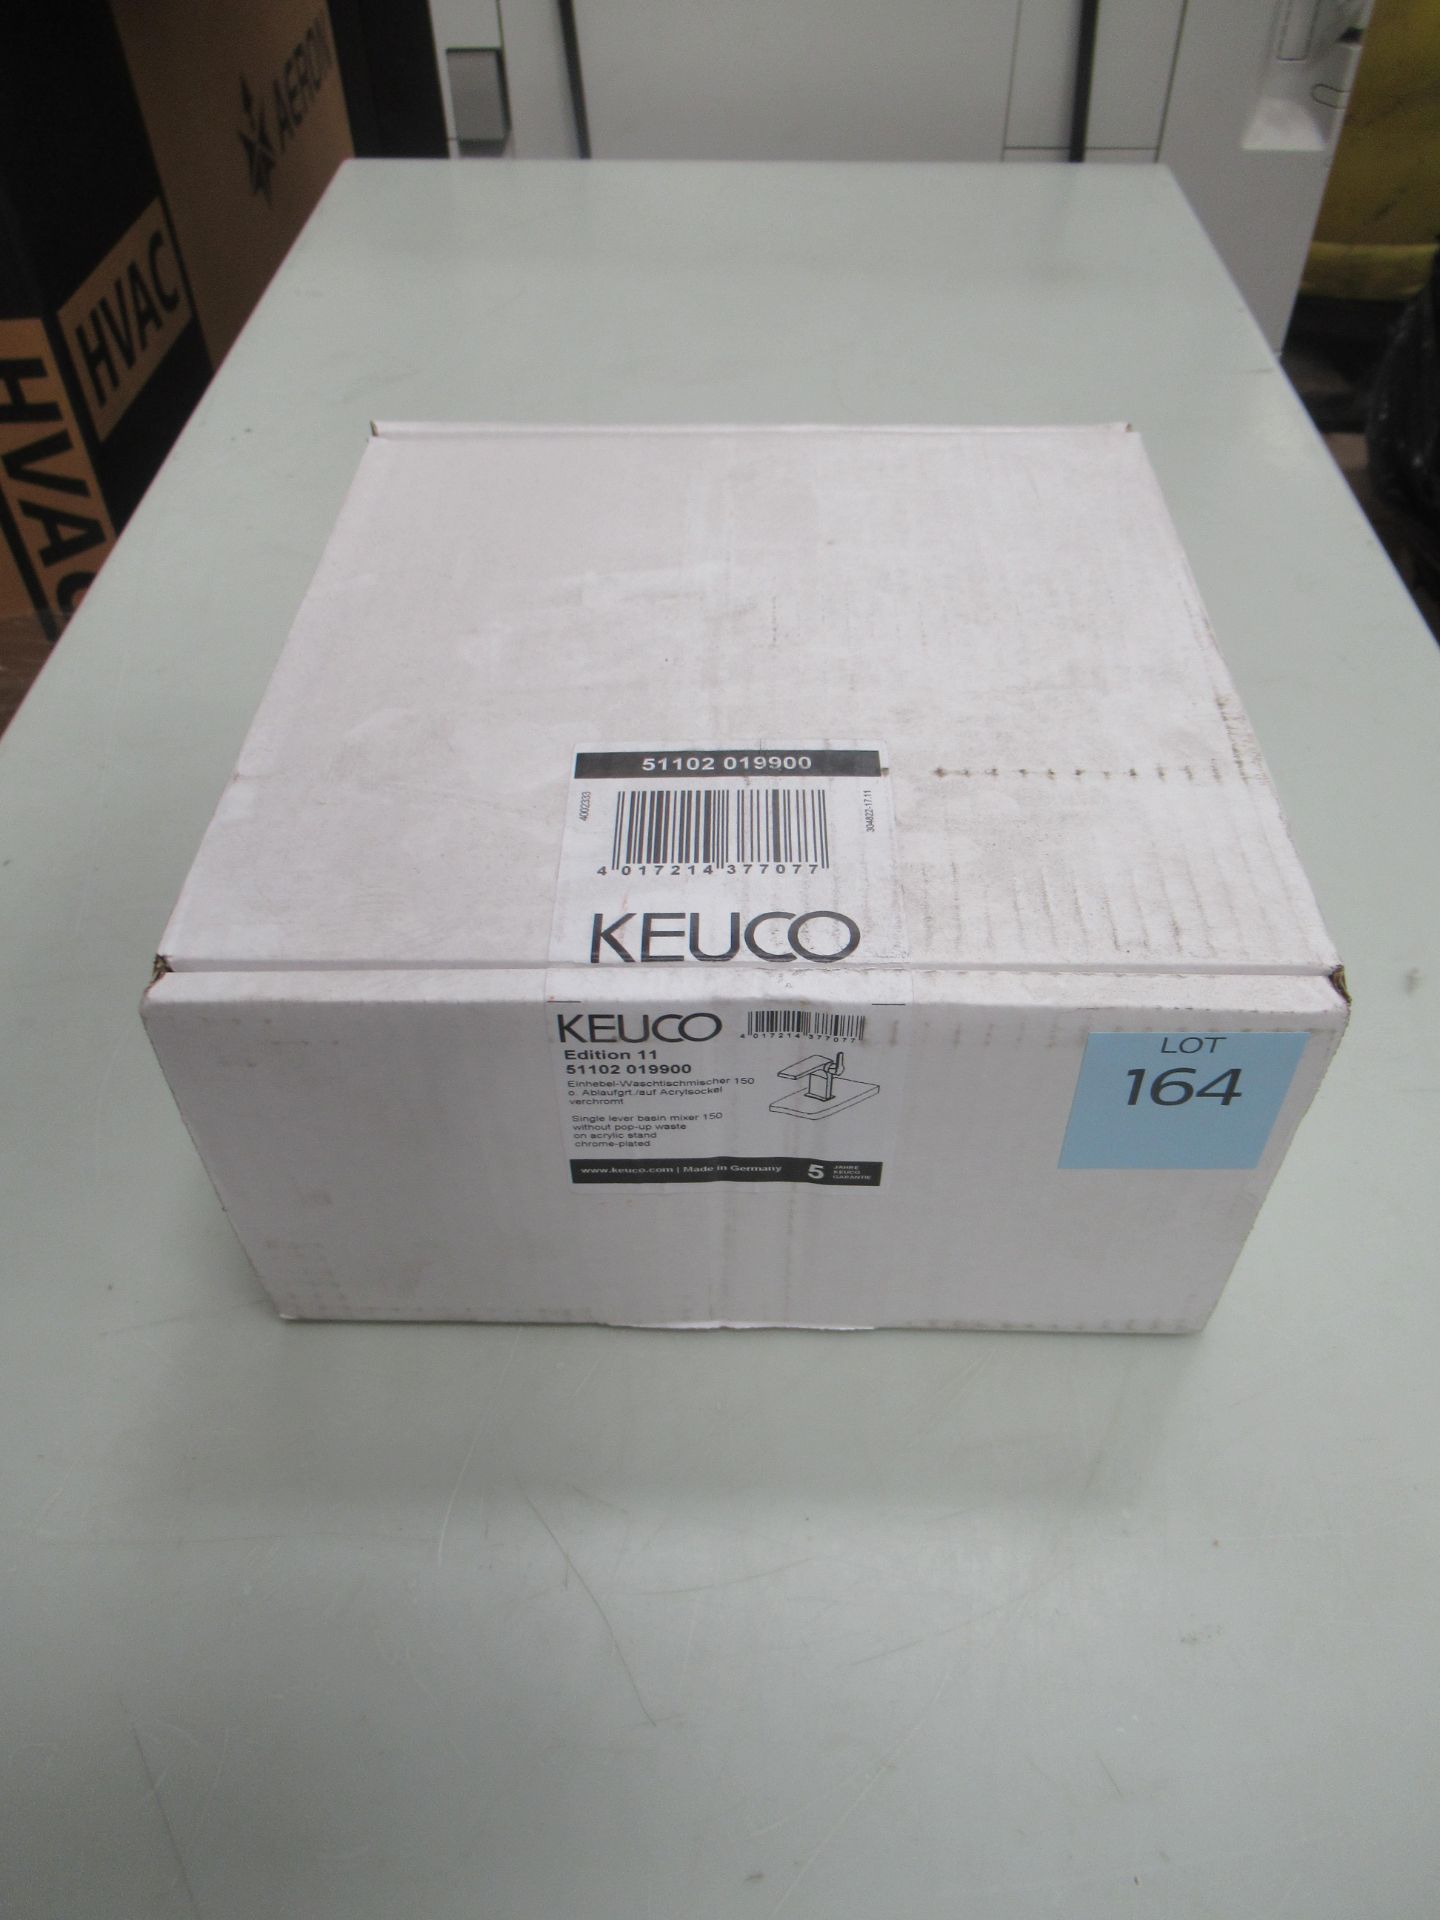 A Keuco Edition II Single Lever Basin Mixer 150-Tap, Chrome Plated, P/N 51102-019900